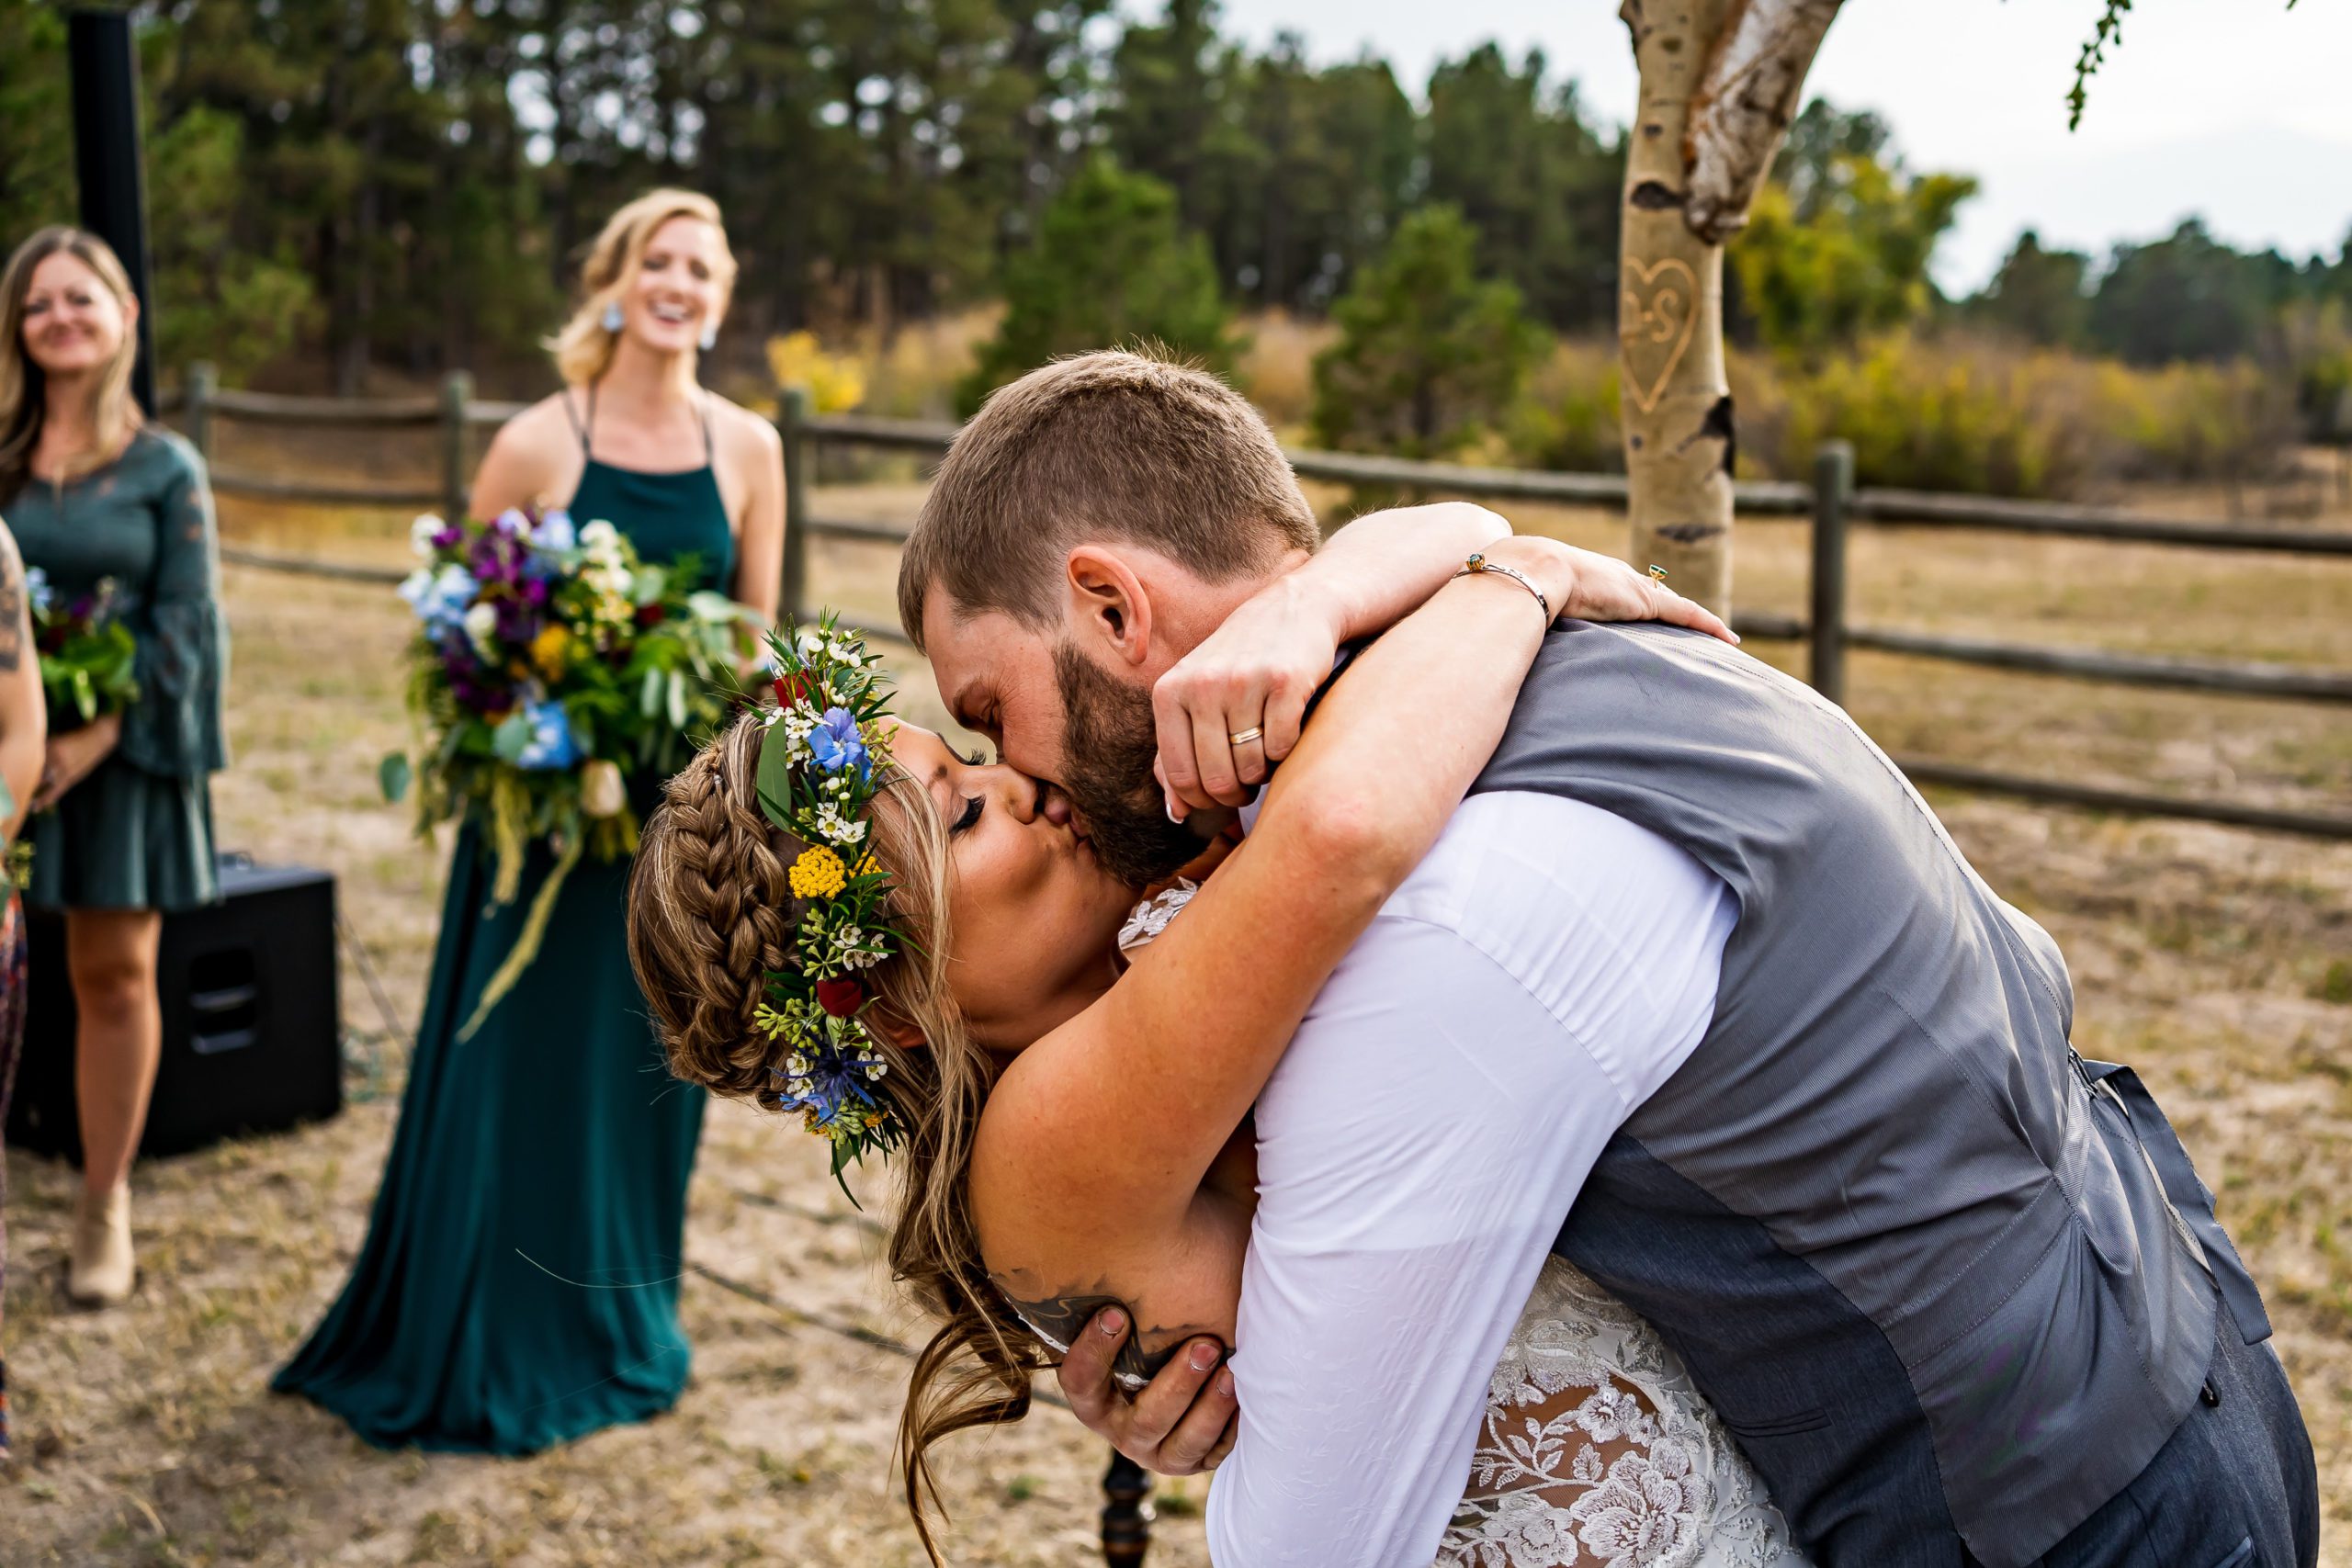 A bride and groom kiss at their backyard wedding in Colorado.